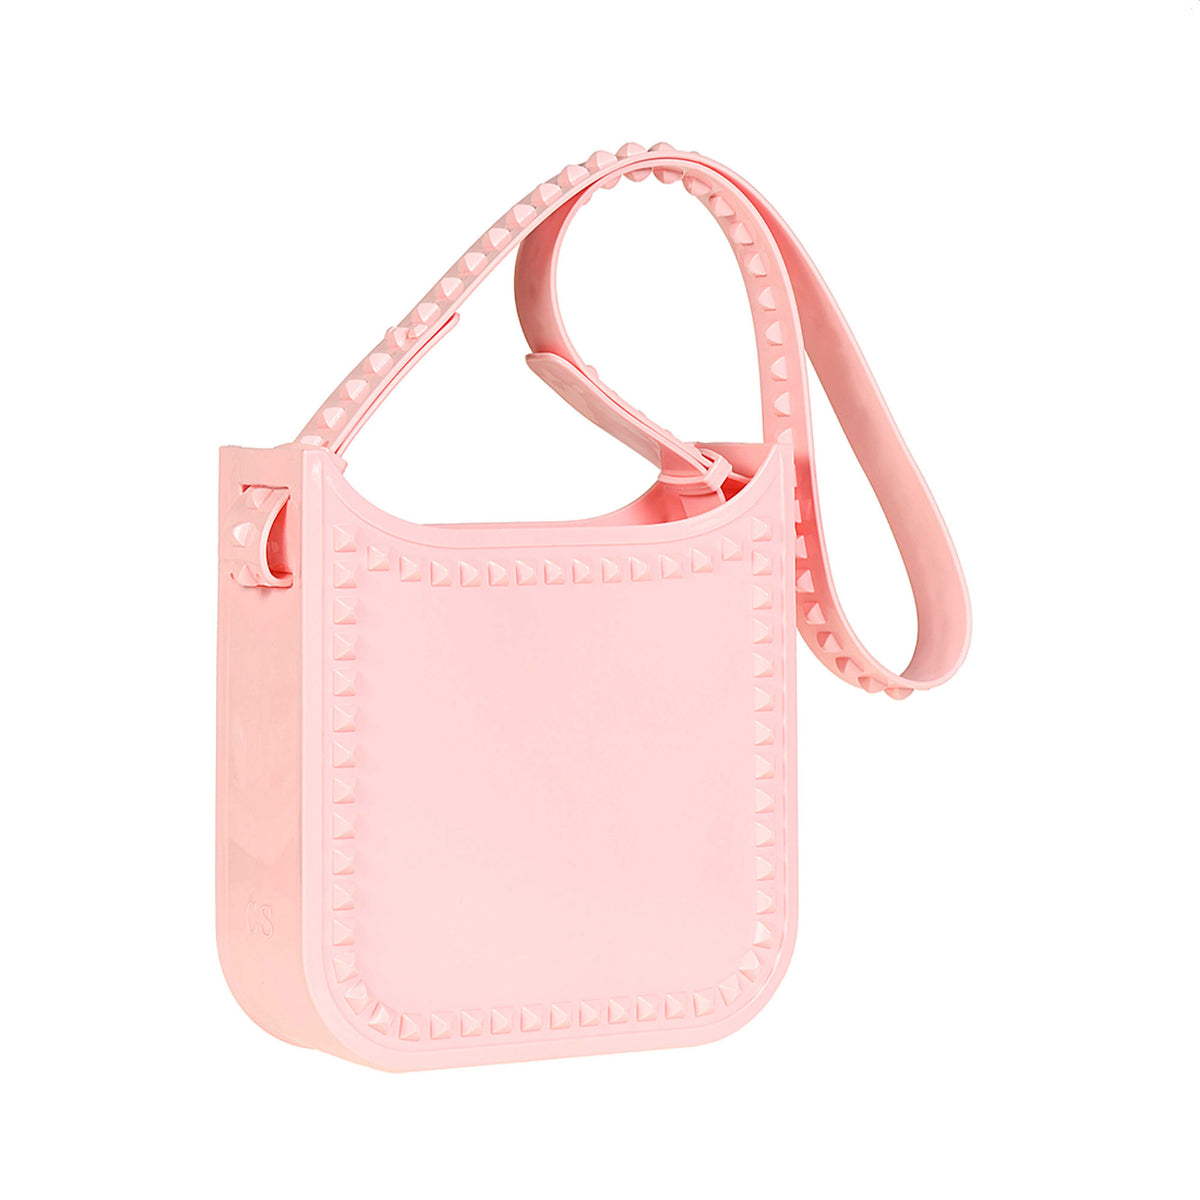 Baby pink Carmen Sol Toni beach bags for women with studs